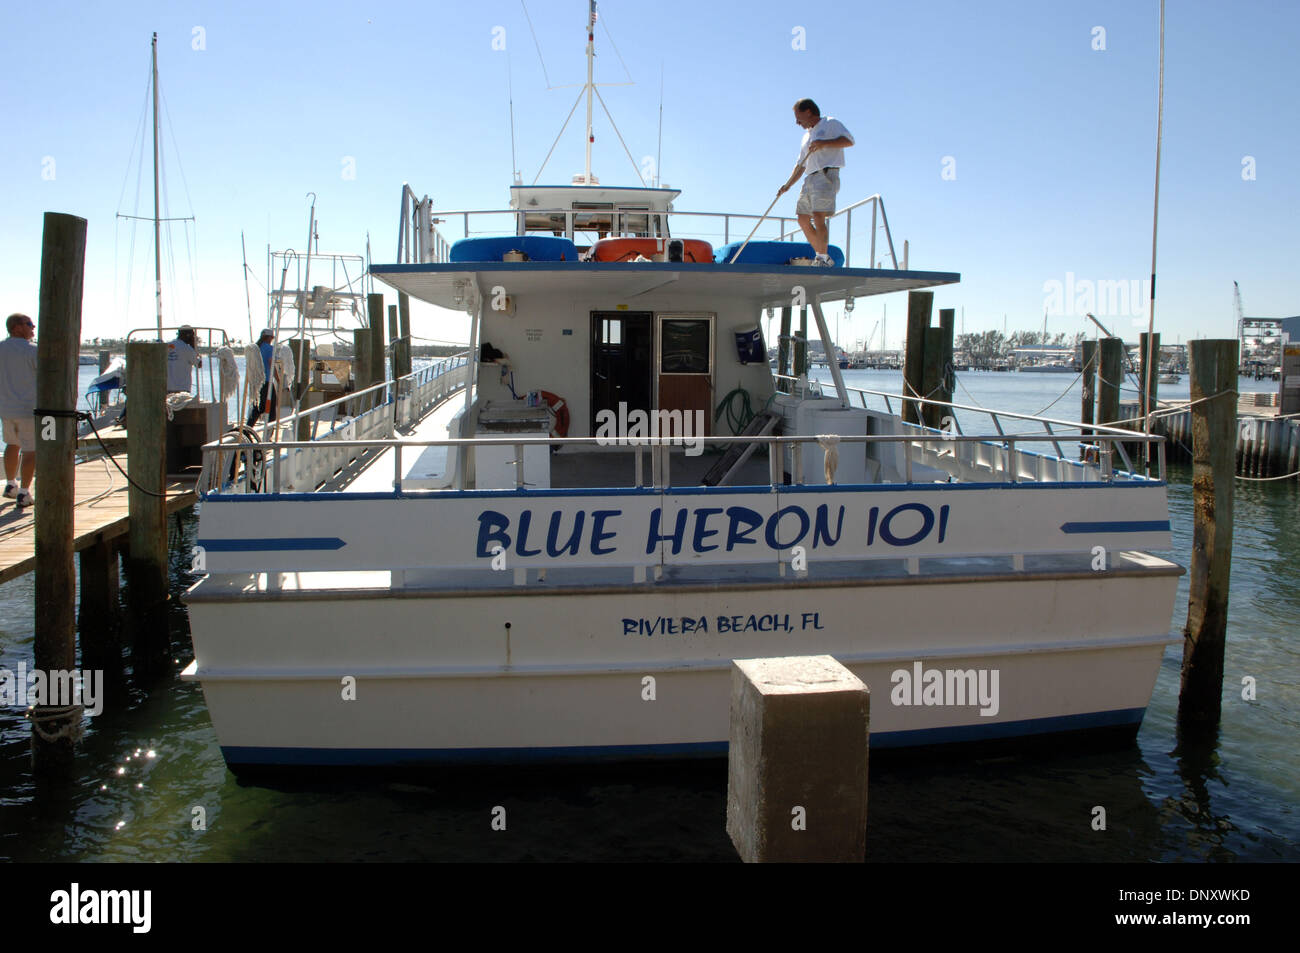 Jan 05, 2006; Riviera Beach, FL, USA; Capt. JACK DONOVAN readies a deep-water fishing boat for customers at Riviera Beach, FL. The family-owned business may be forced out if the town proceeds with redevelopment, as the town's mayor wants to eliminate the area's high unemployment and seedy appearance by redeveloping waterfront under much debated state eminent domain law. Mandatory C Stock Photo